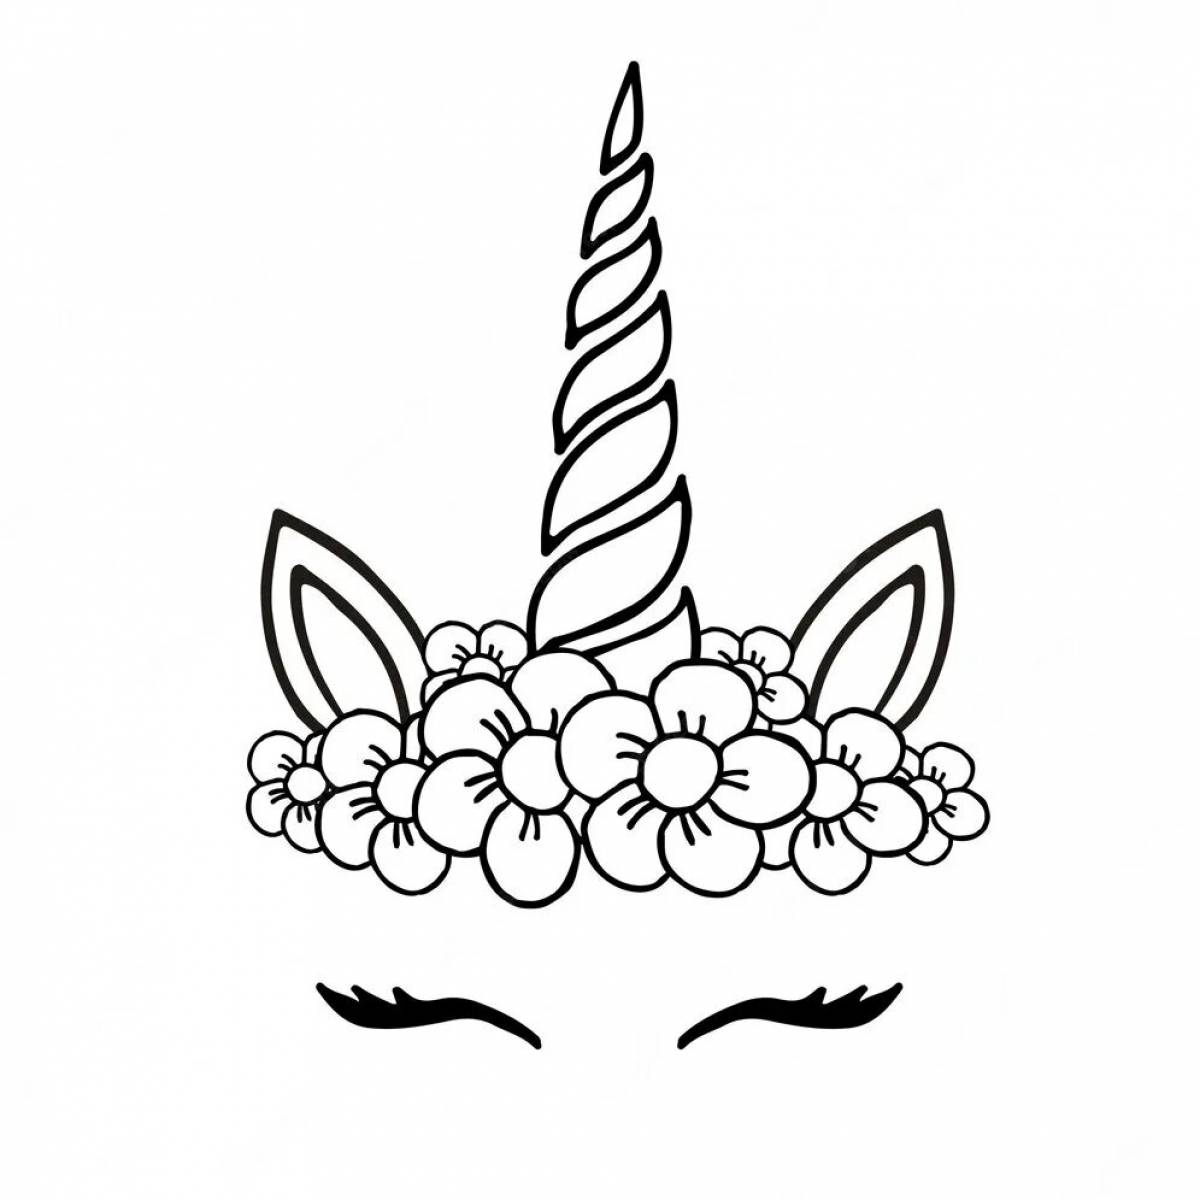 Exalted unicorn horn coloring page